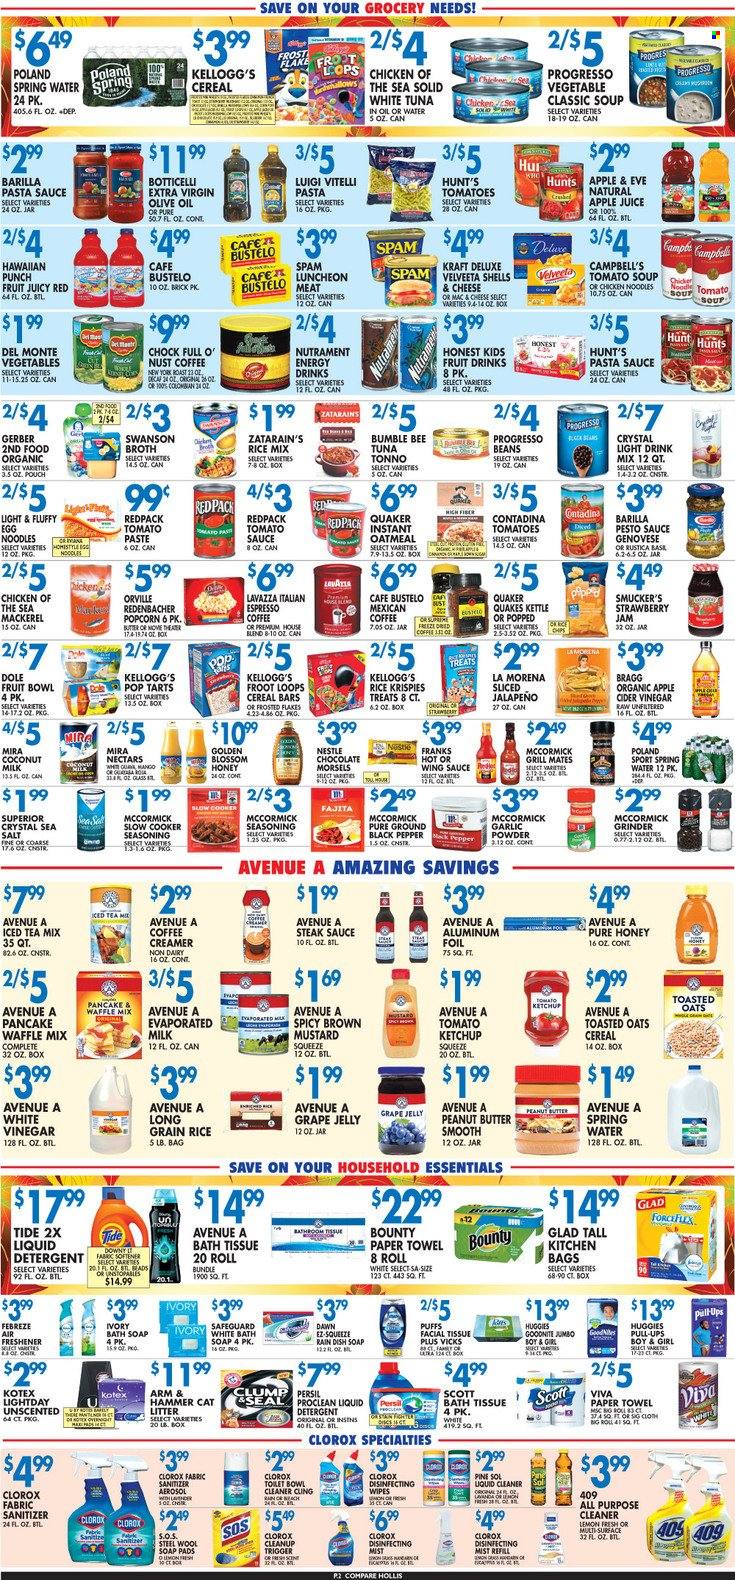 thumbnail - Compare Foods Flyer - 09/23/2022 - 09/29/2022 - Sales products - puffs, Dole, jalapeño, mackerel, tuna, Campbell's, tomato soup, pasta sauce, soup, Bumble Bee, sauce, pancakes, Barilla, fajita, Quaker, noodles, Progresso, Kraft®, Spam, lunch meat, evaporated milk, Blossom, creamer, Nestlé, chocolate, Bounty, jelly, cereal bar, Kellogg's, Pop-Tarts, Gerber, popcorn, ARM & HAMMER, oatmeal, sea salt, broth, black beans, coconut milk, tomato paste, tomato sauce, Chicken of the Sea, Del Monte, cereals, Rice Krispies, Frosted Flakes, toasted oats, egg noodles, long grain rice, spice, garlic powder, mustard, steak sauce, ketchup, pesto, wing sauce, apple cider vinegar, extra virgin olive oil, vinegar, olive oil, grape jelly, honey, fruit jam, peanut butter, apple juice, juice, energy drink, ice tea, spring water, Lavazza, steak, cat litter, Vicks. Page 2.